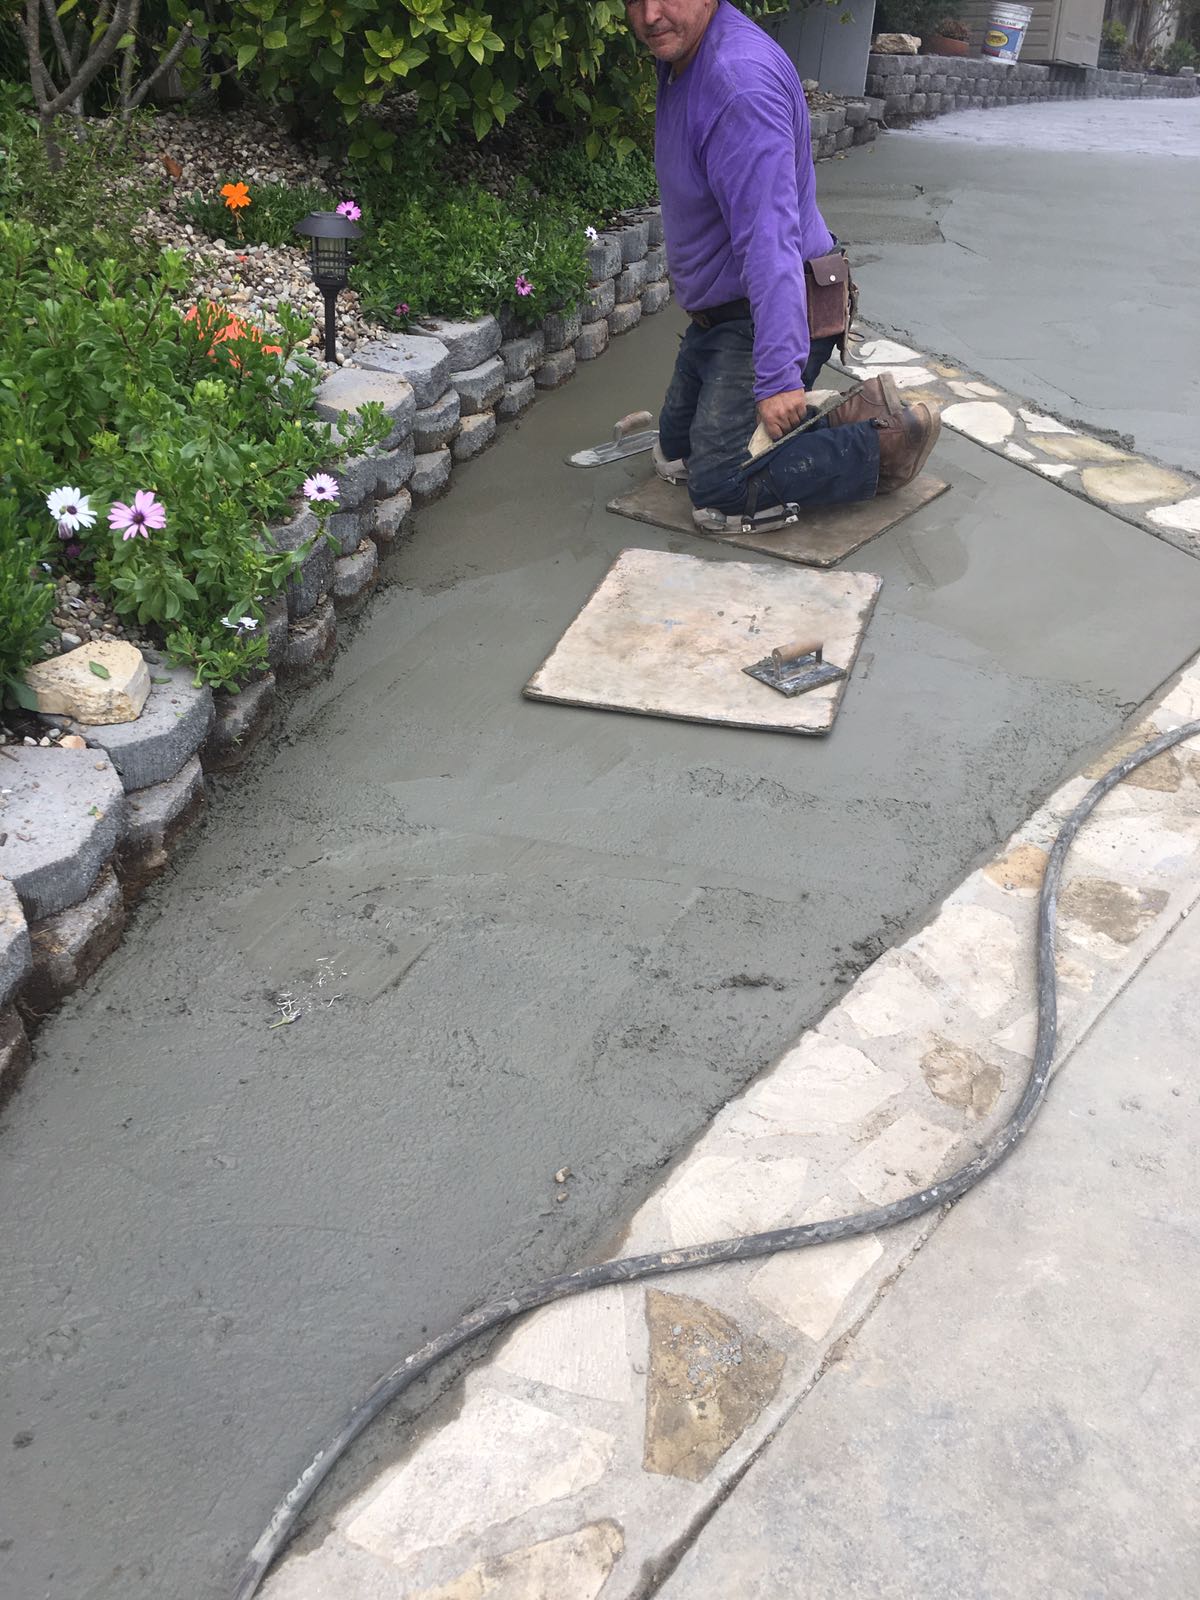 A person kneeling down on the ground with a tile